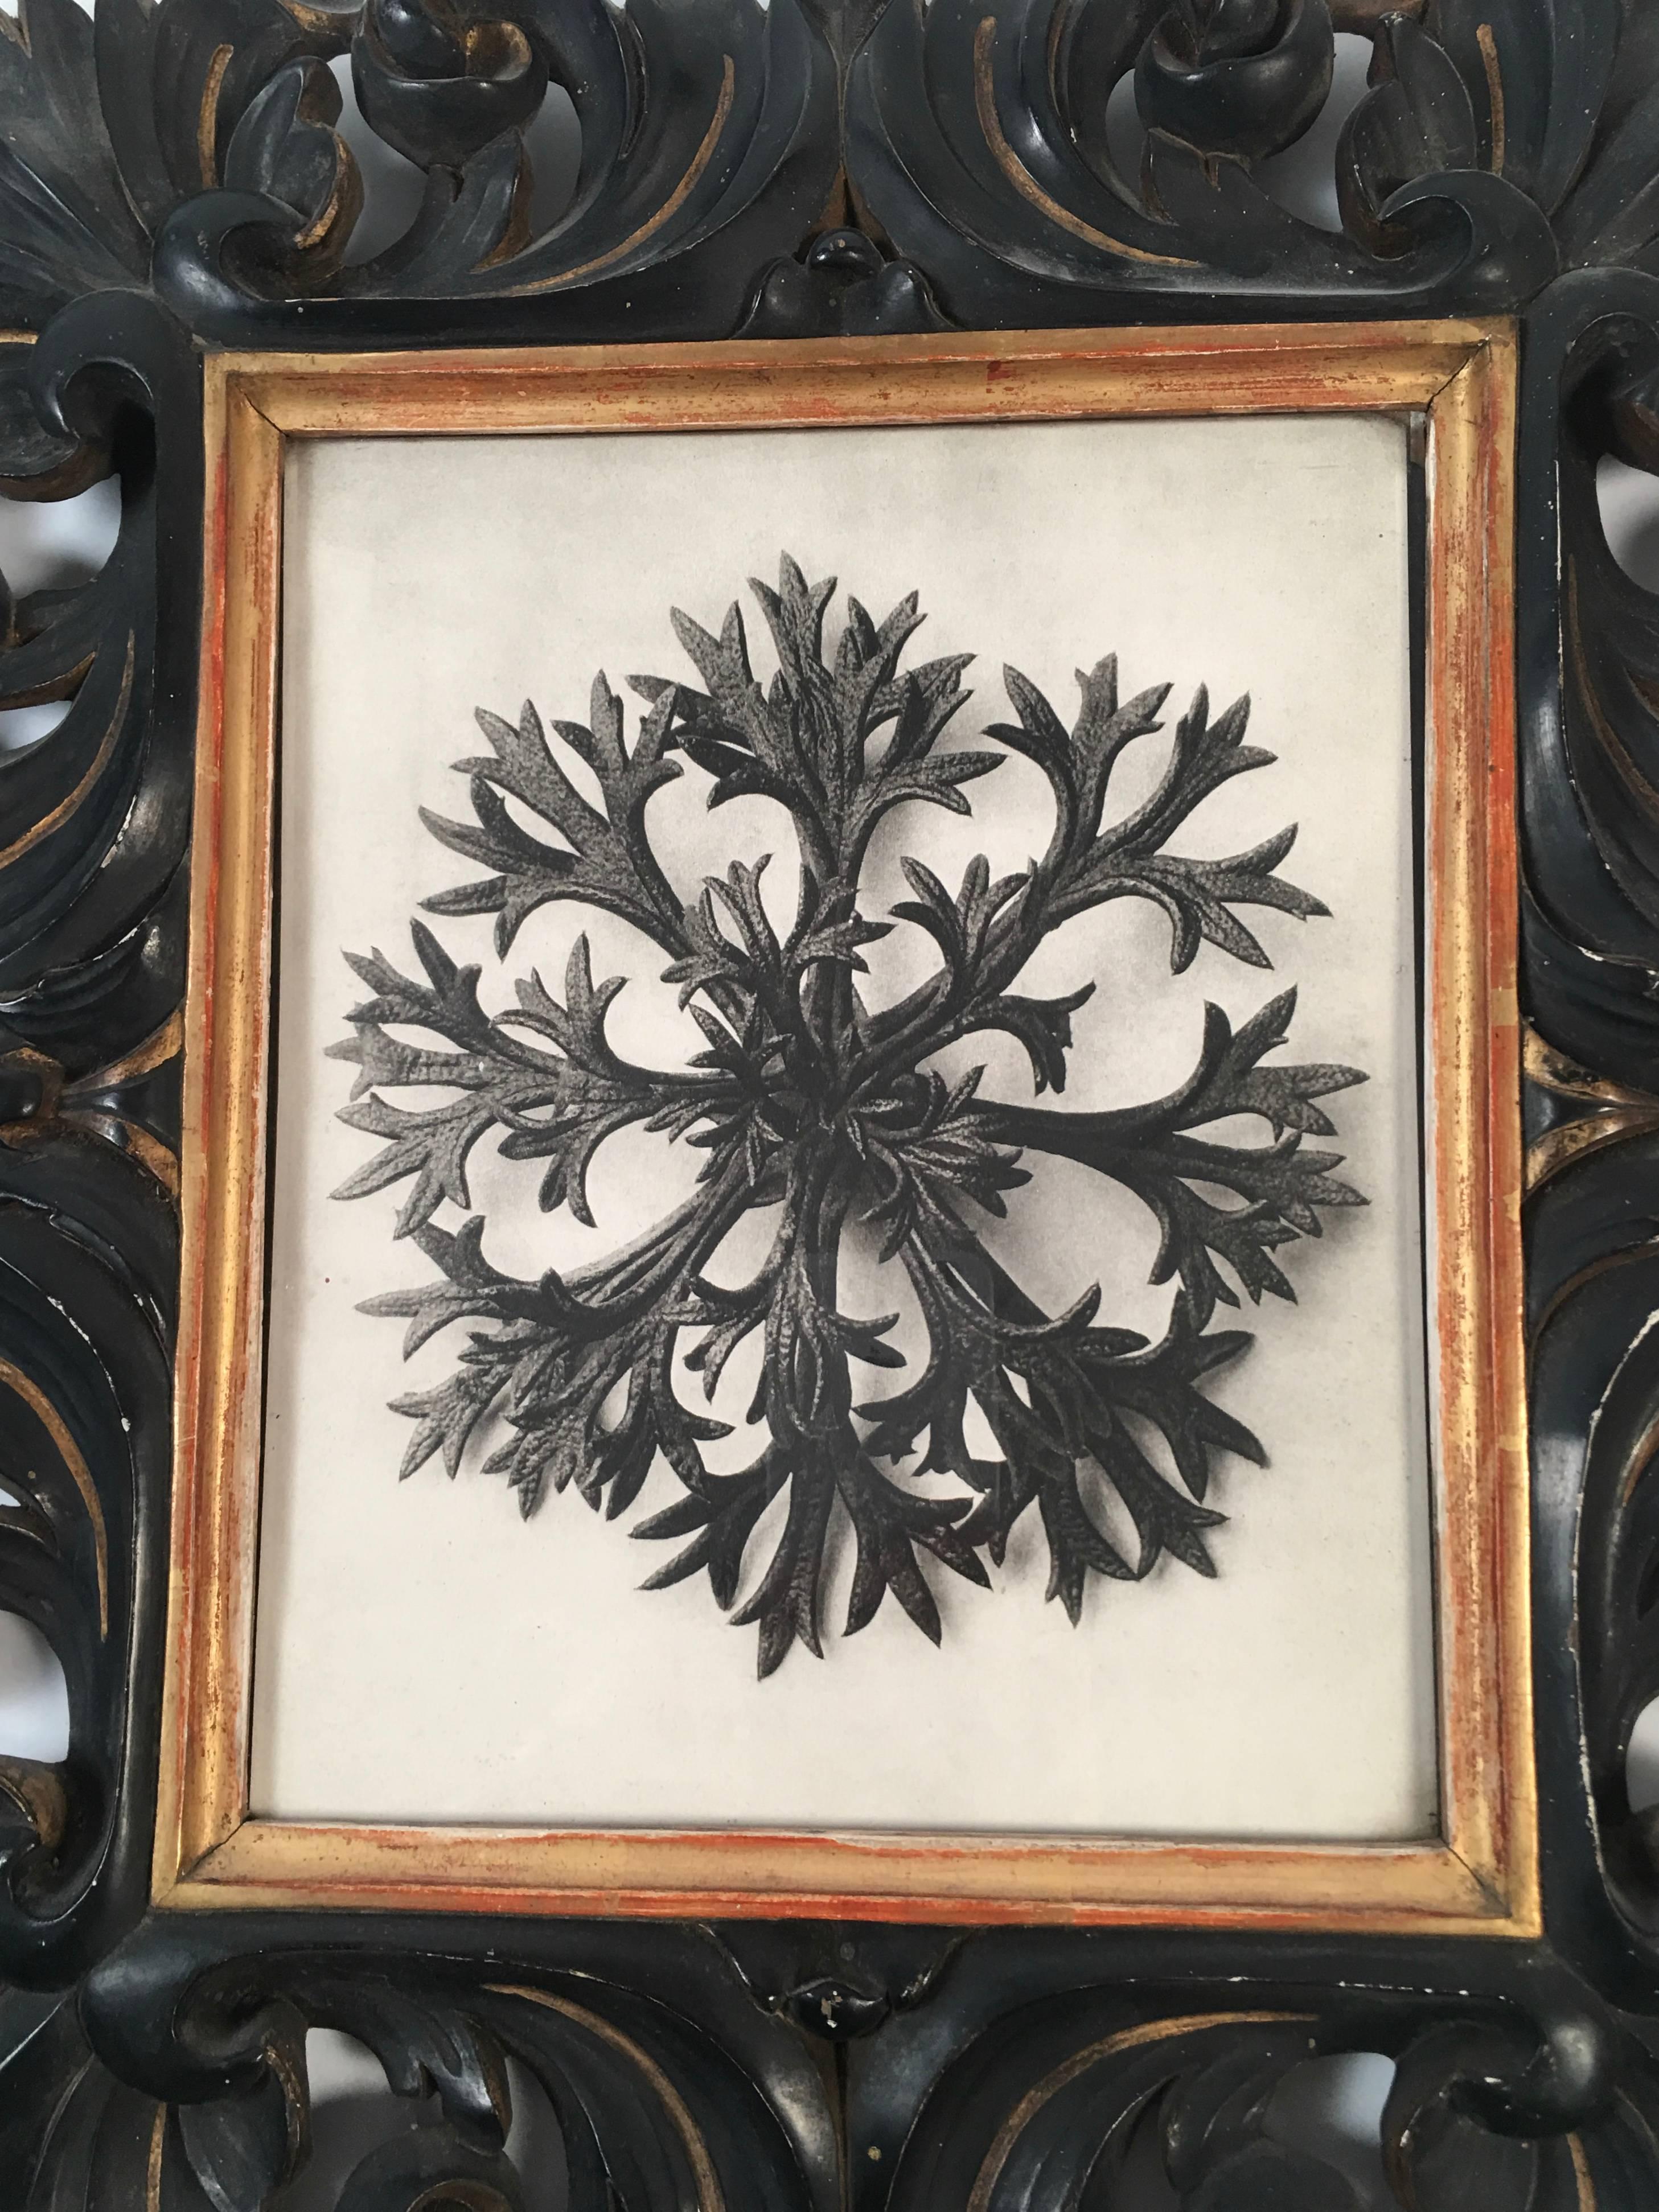 A Karl Blossfeldt (German, 1865-1932) photogravure of an enlarged leaf rosette in a 19th century Spanish style carved wood frame from Paris. The plant depicted is Saxifrage Wilkommiana, (William's saxifrage), a leaf-rosette, which has been enlarged